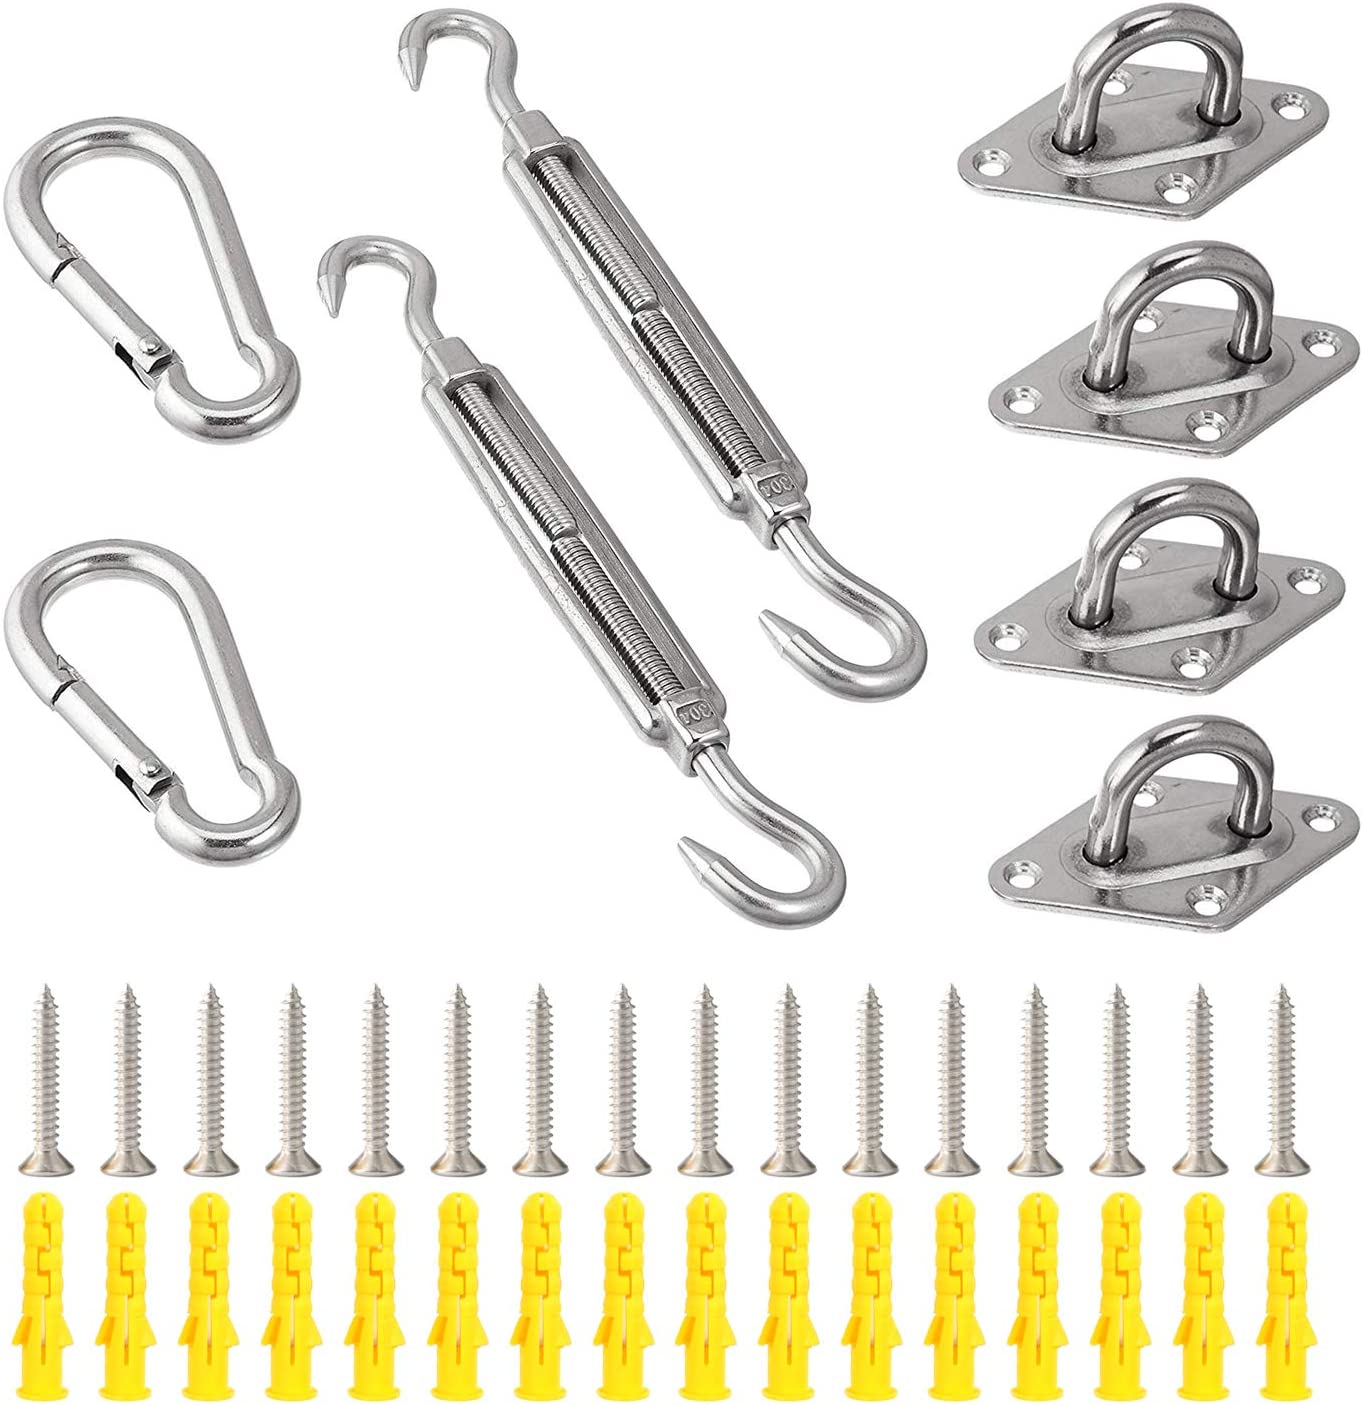 OUTDOOR WIND 304 Marine 40 PCS Sun Shade Sail Sail Shade Stainless Steel Fixing Fittings Hardware Accessory Kit - e4cents